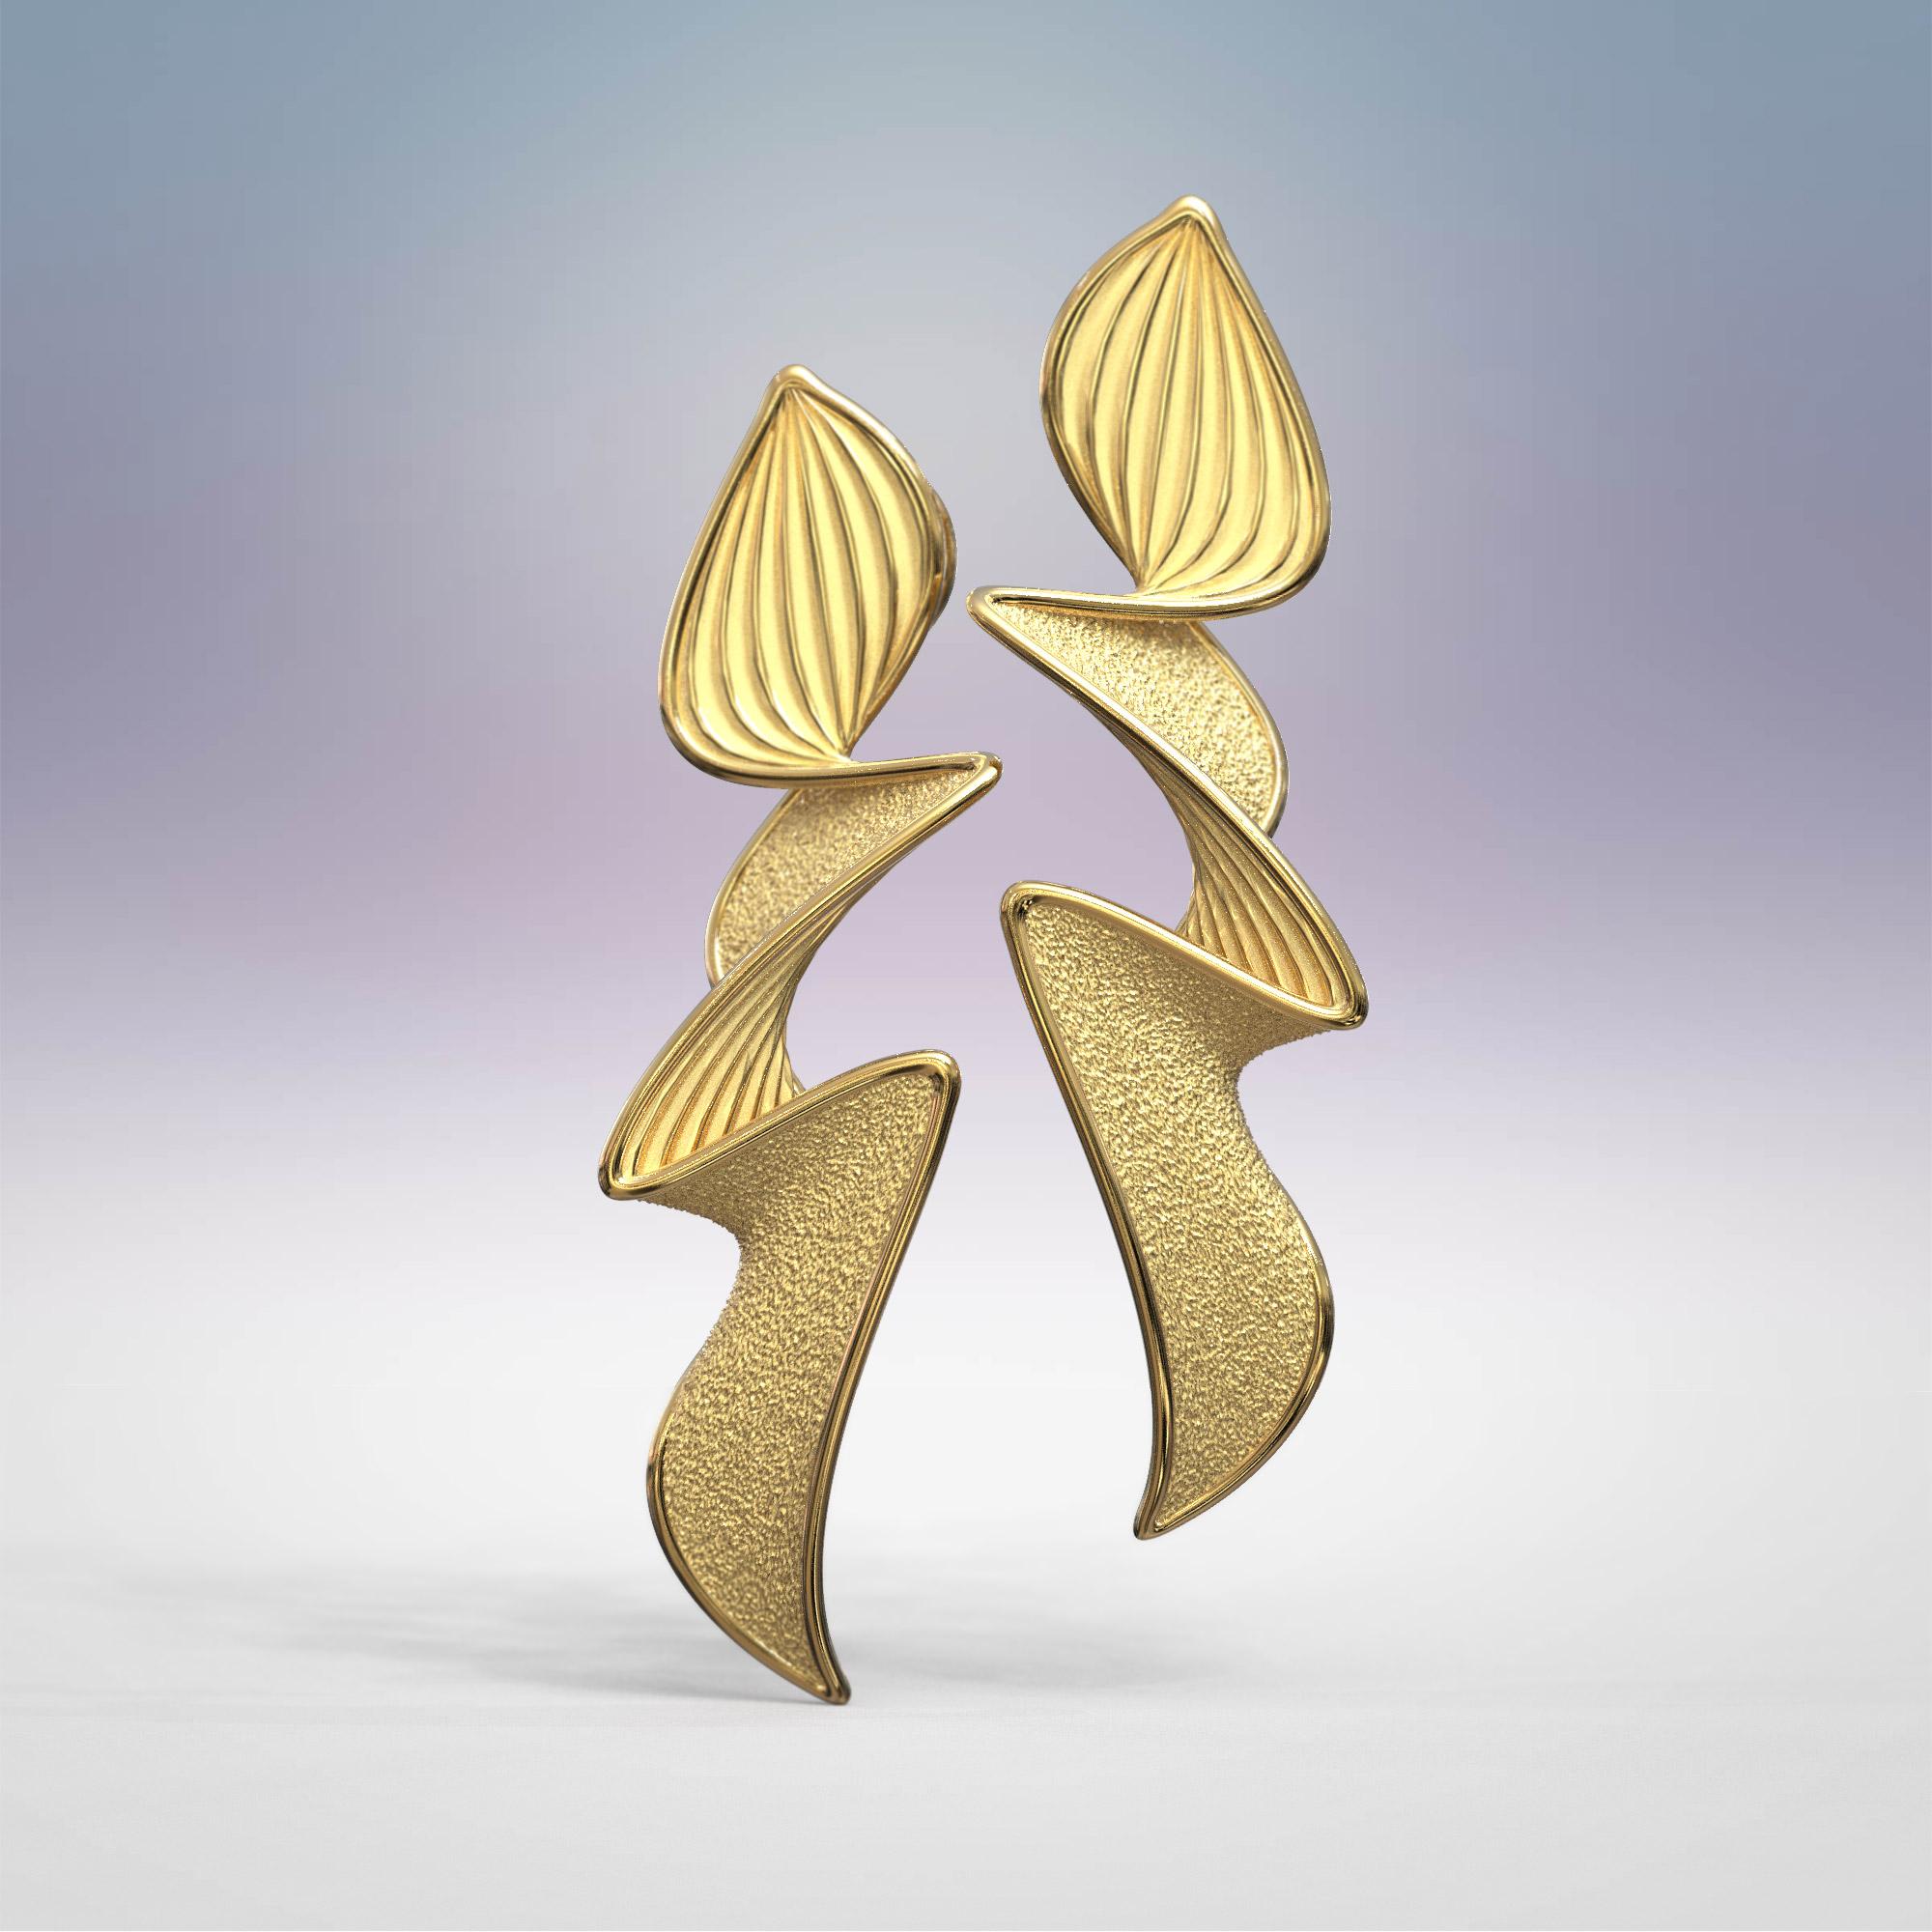 Contemporary Statement Earrings in 14k by Oltremare Gioielli, Italian Fine Jewelry  For Sale